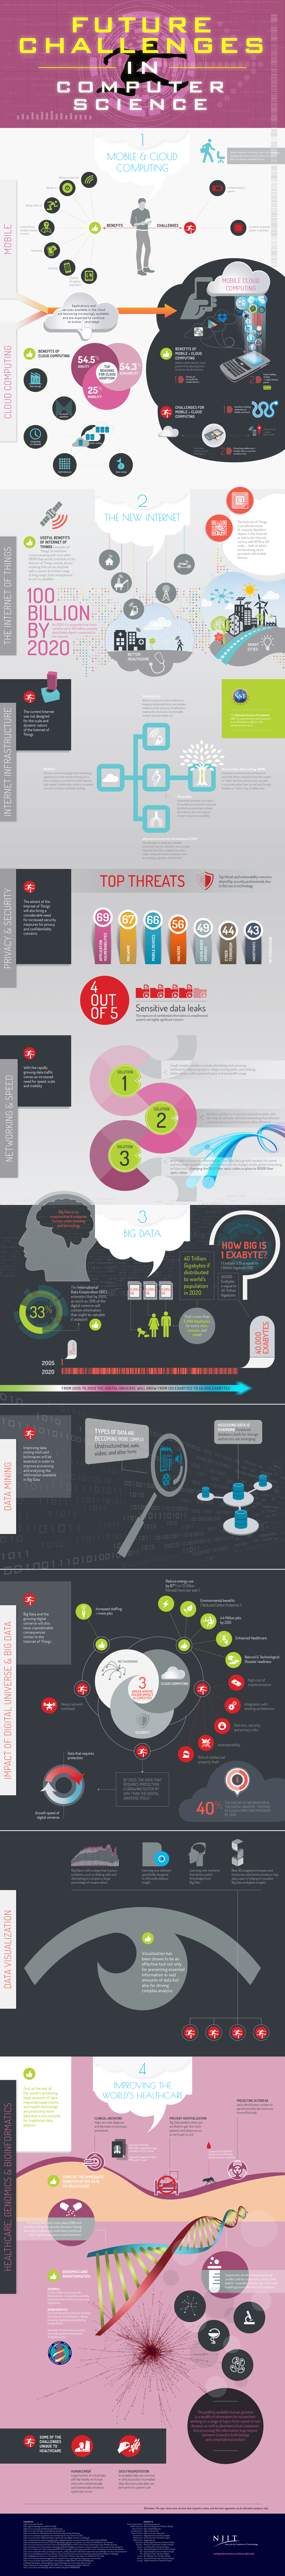 Future Challenges in Computer Science Infographic